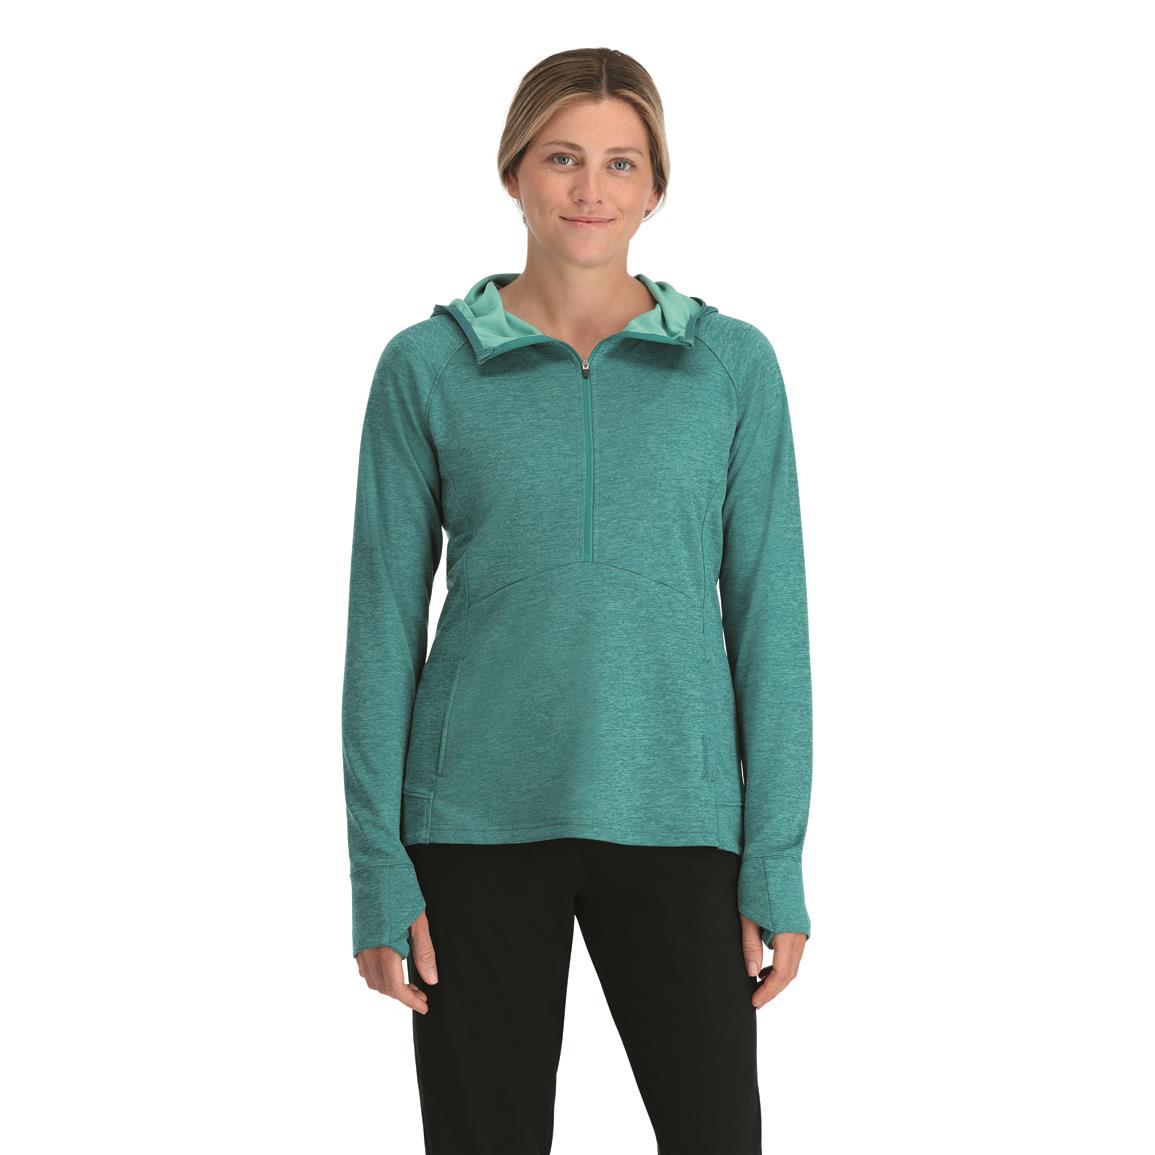 Simms Women's BugStopper Hoodie - 730437, Shirts & Tops at Sportsman's ...